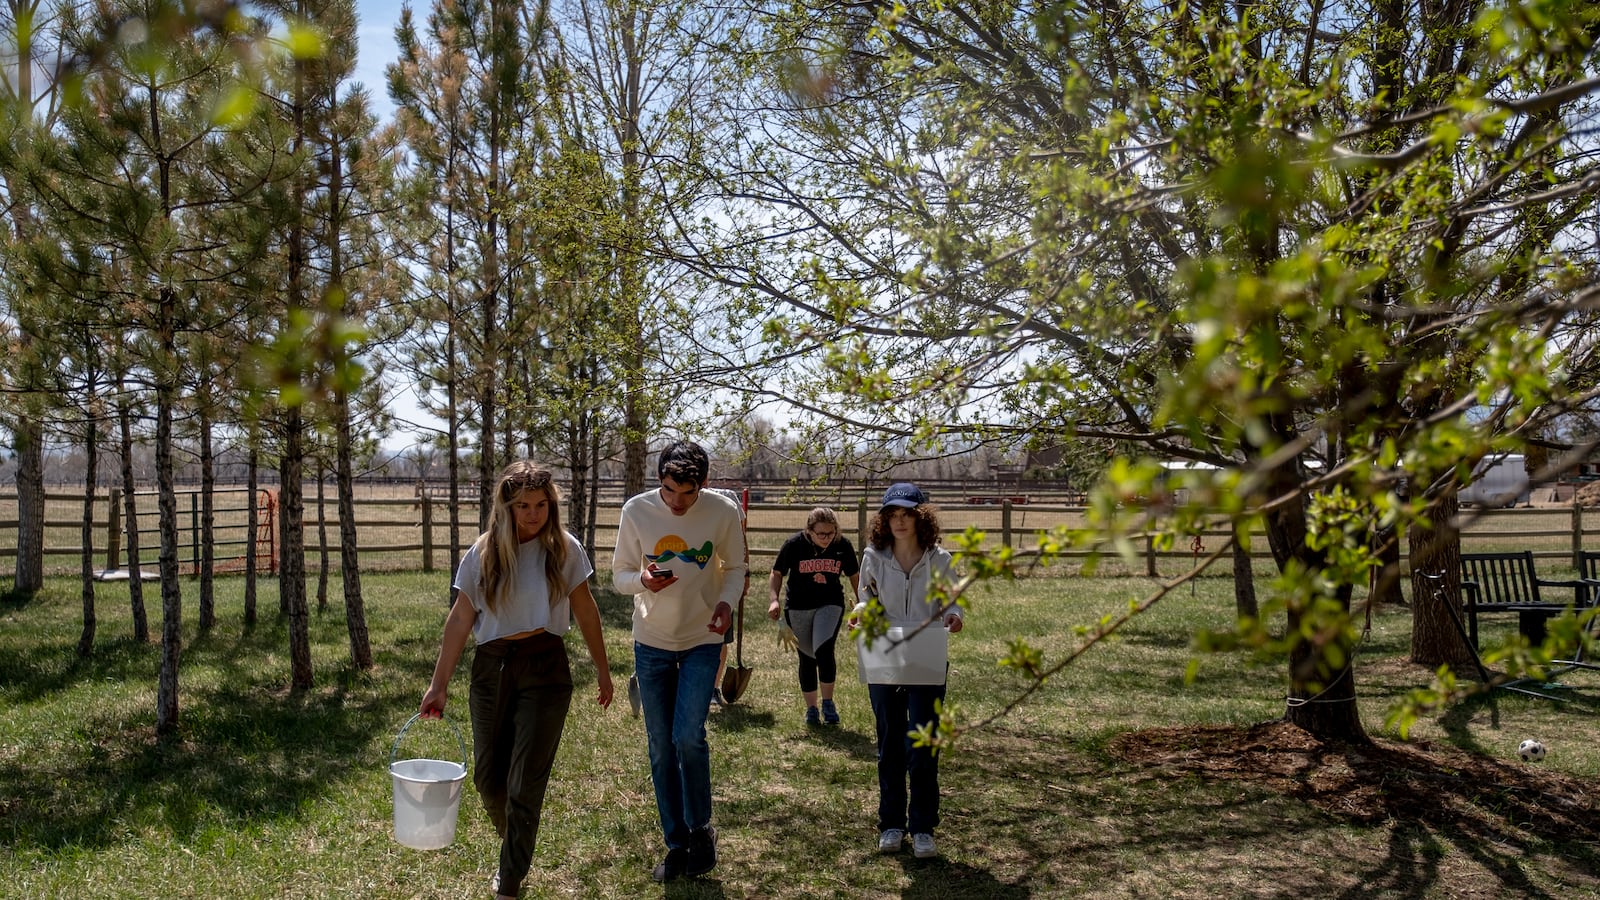 Four high school students walk past thin trees, holding buckets and shovels used to plant saplings on a beautiful, sunny day.